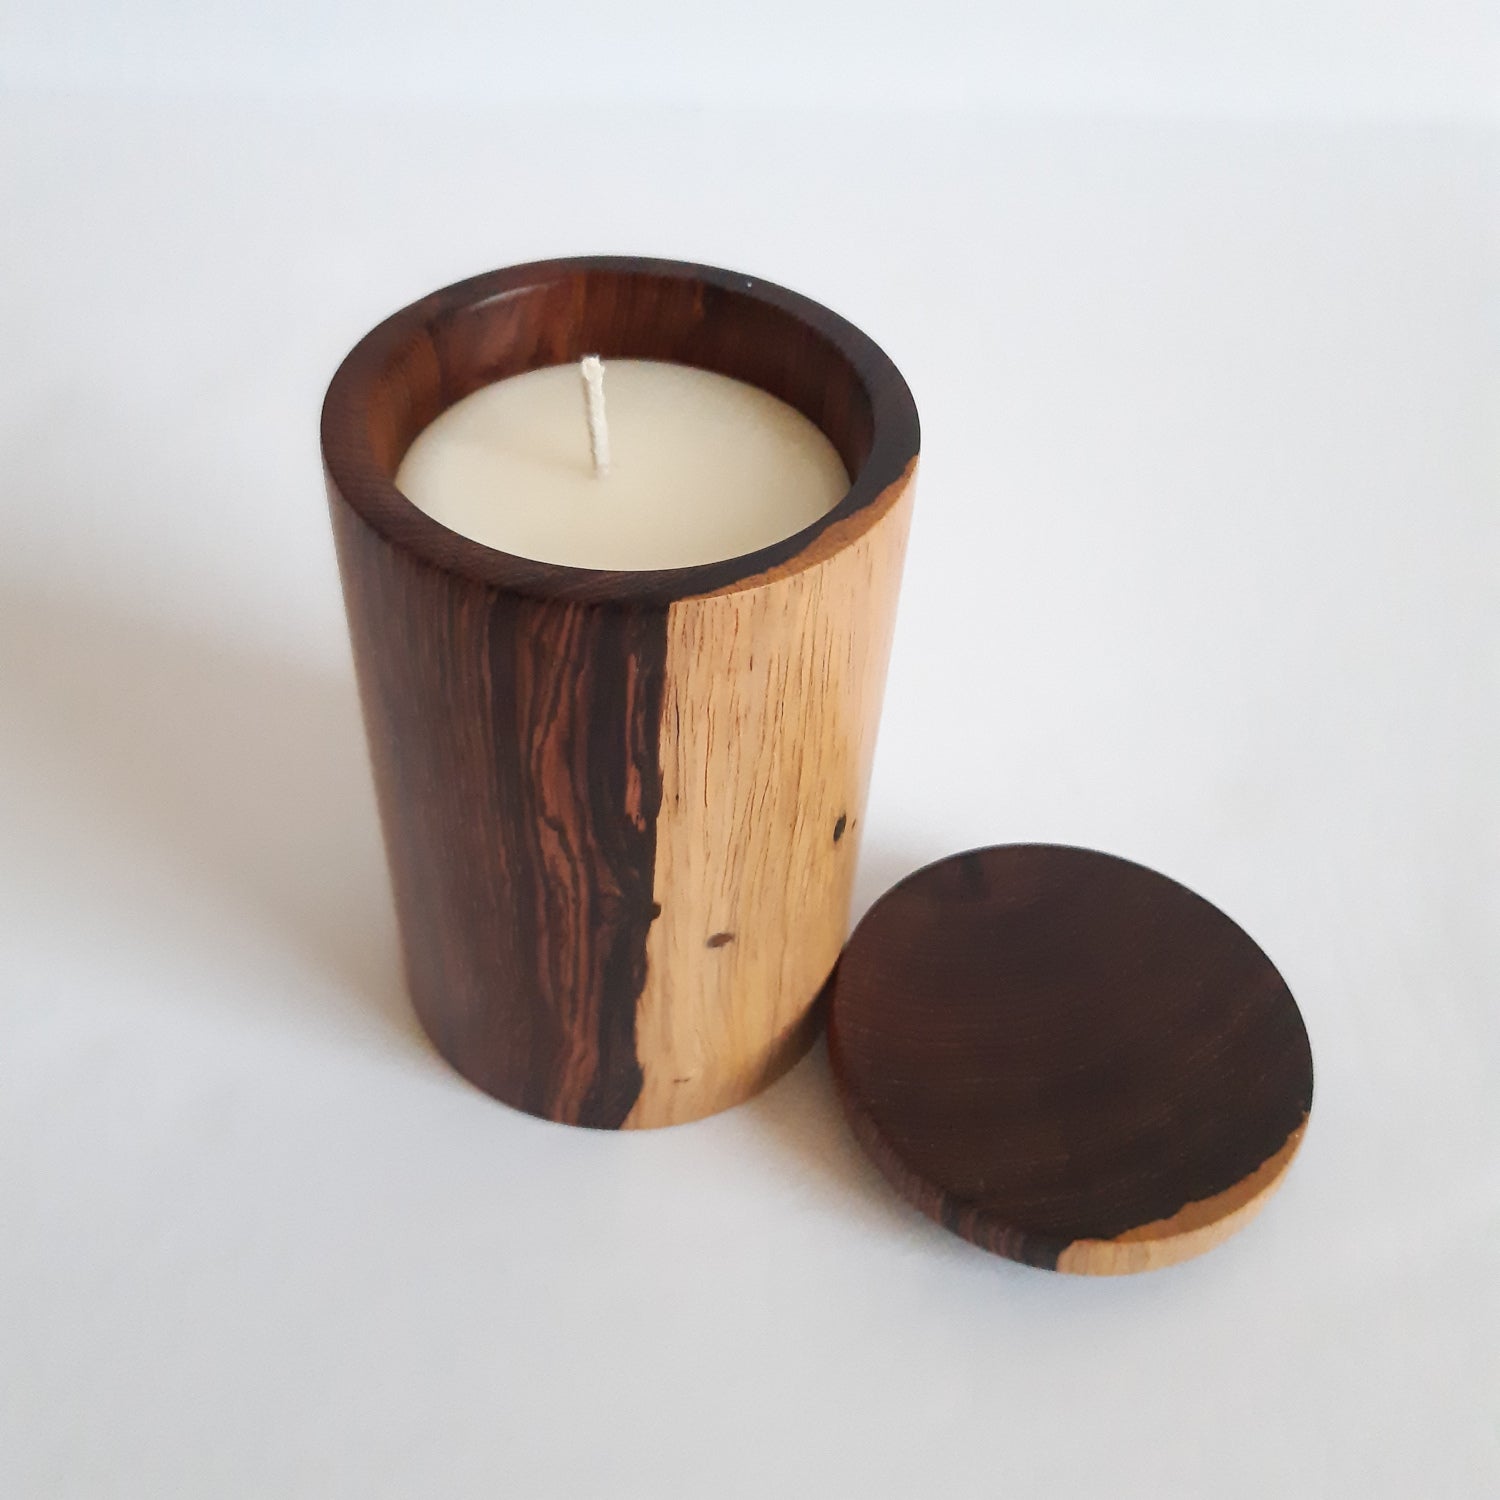 Achiote Guatemalan Goods. Rosul Wood canister 100% Soy Wax Scented Candle Essential Oil